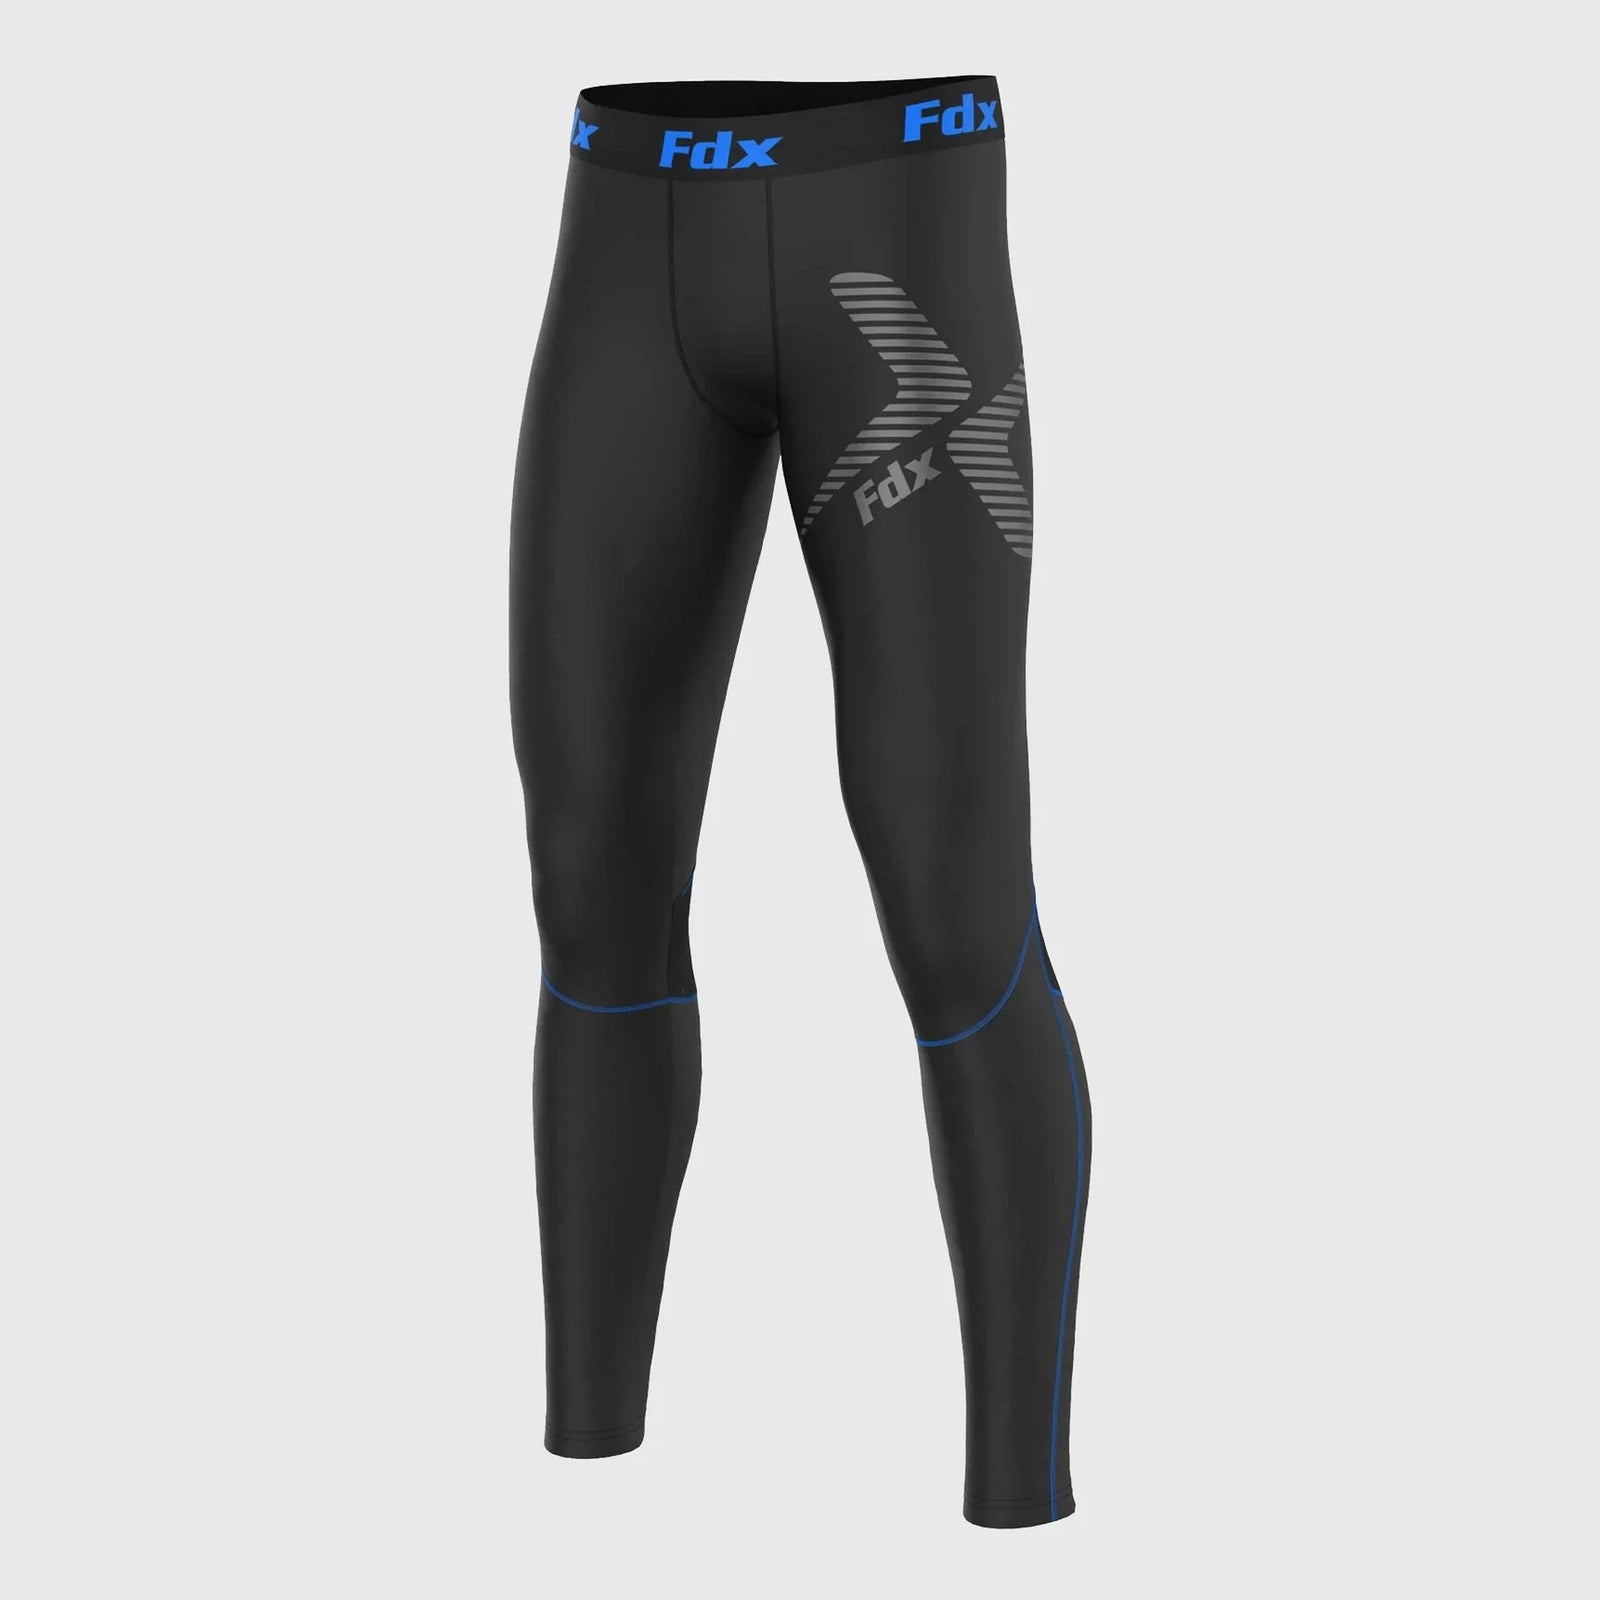 Mens Compression Leggings Thermal Base Layer Long Pants Running Trousers  Bottoms